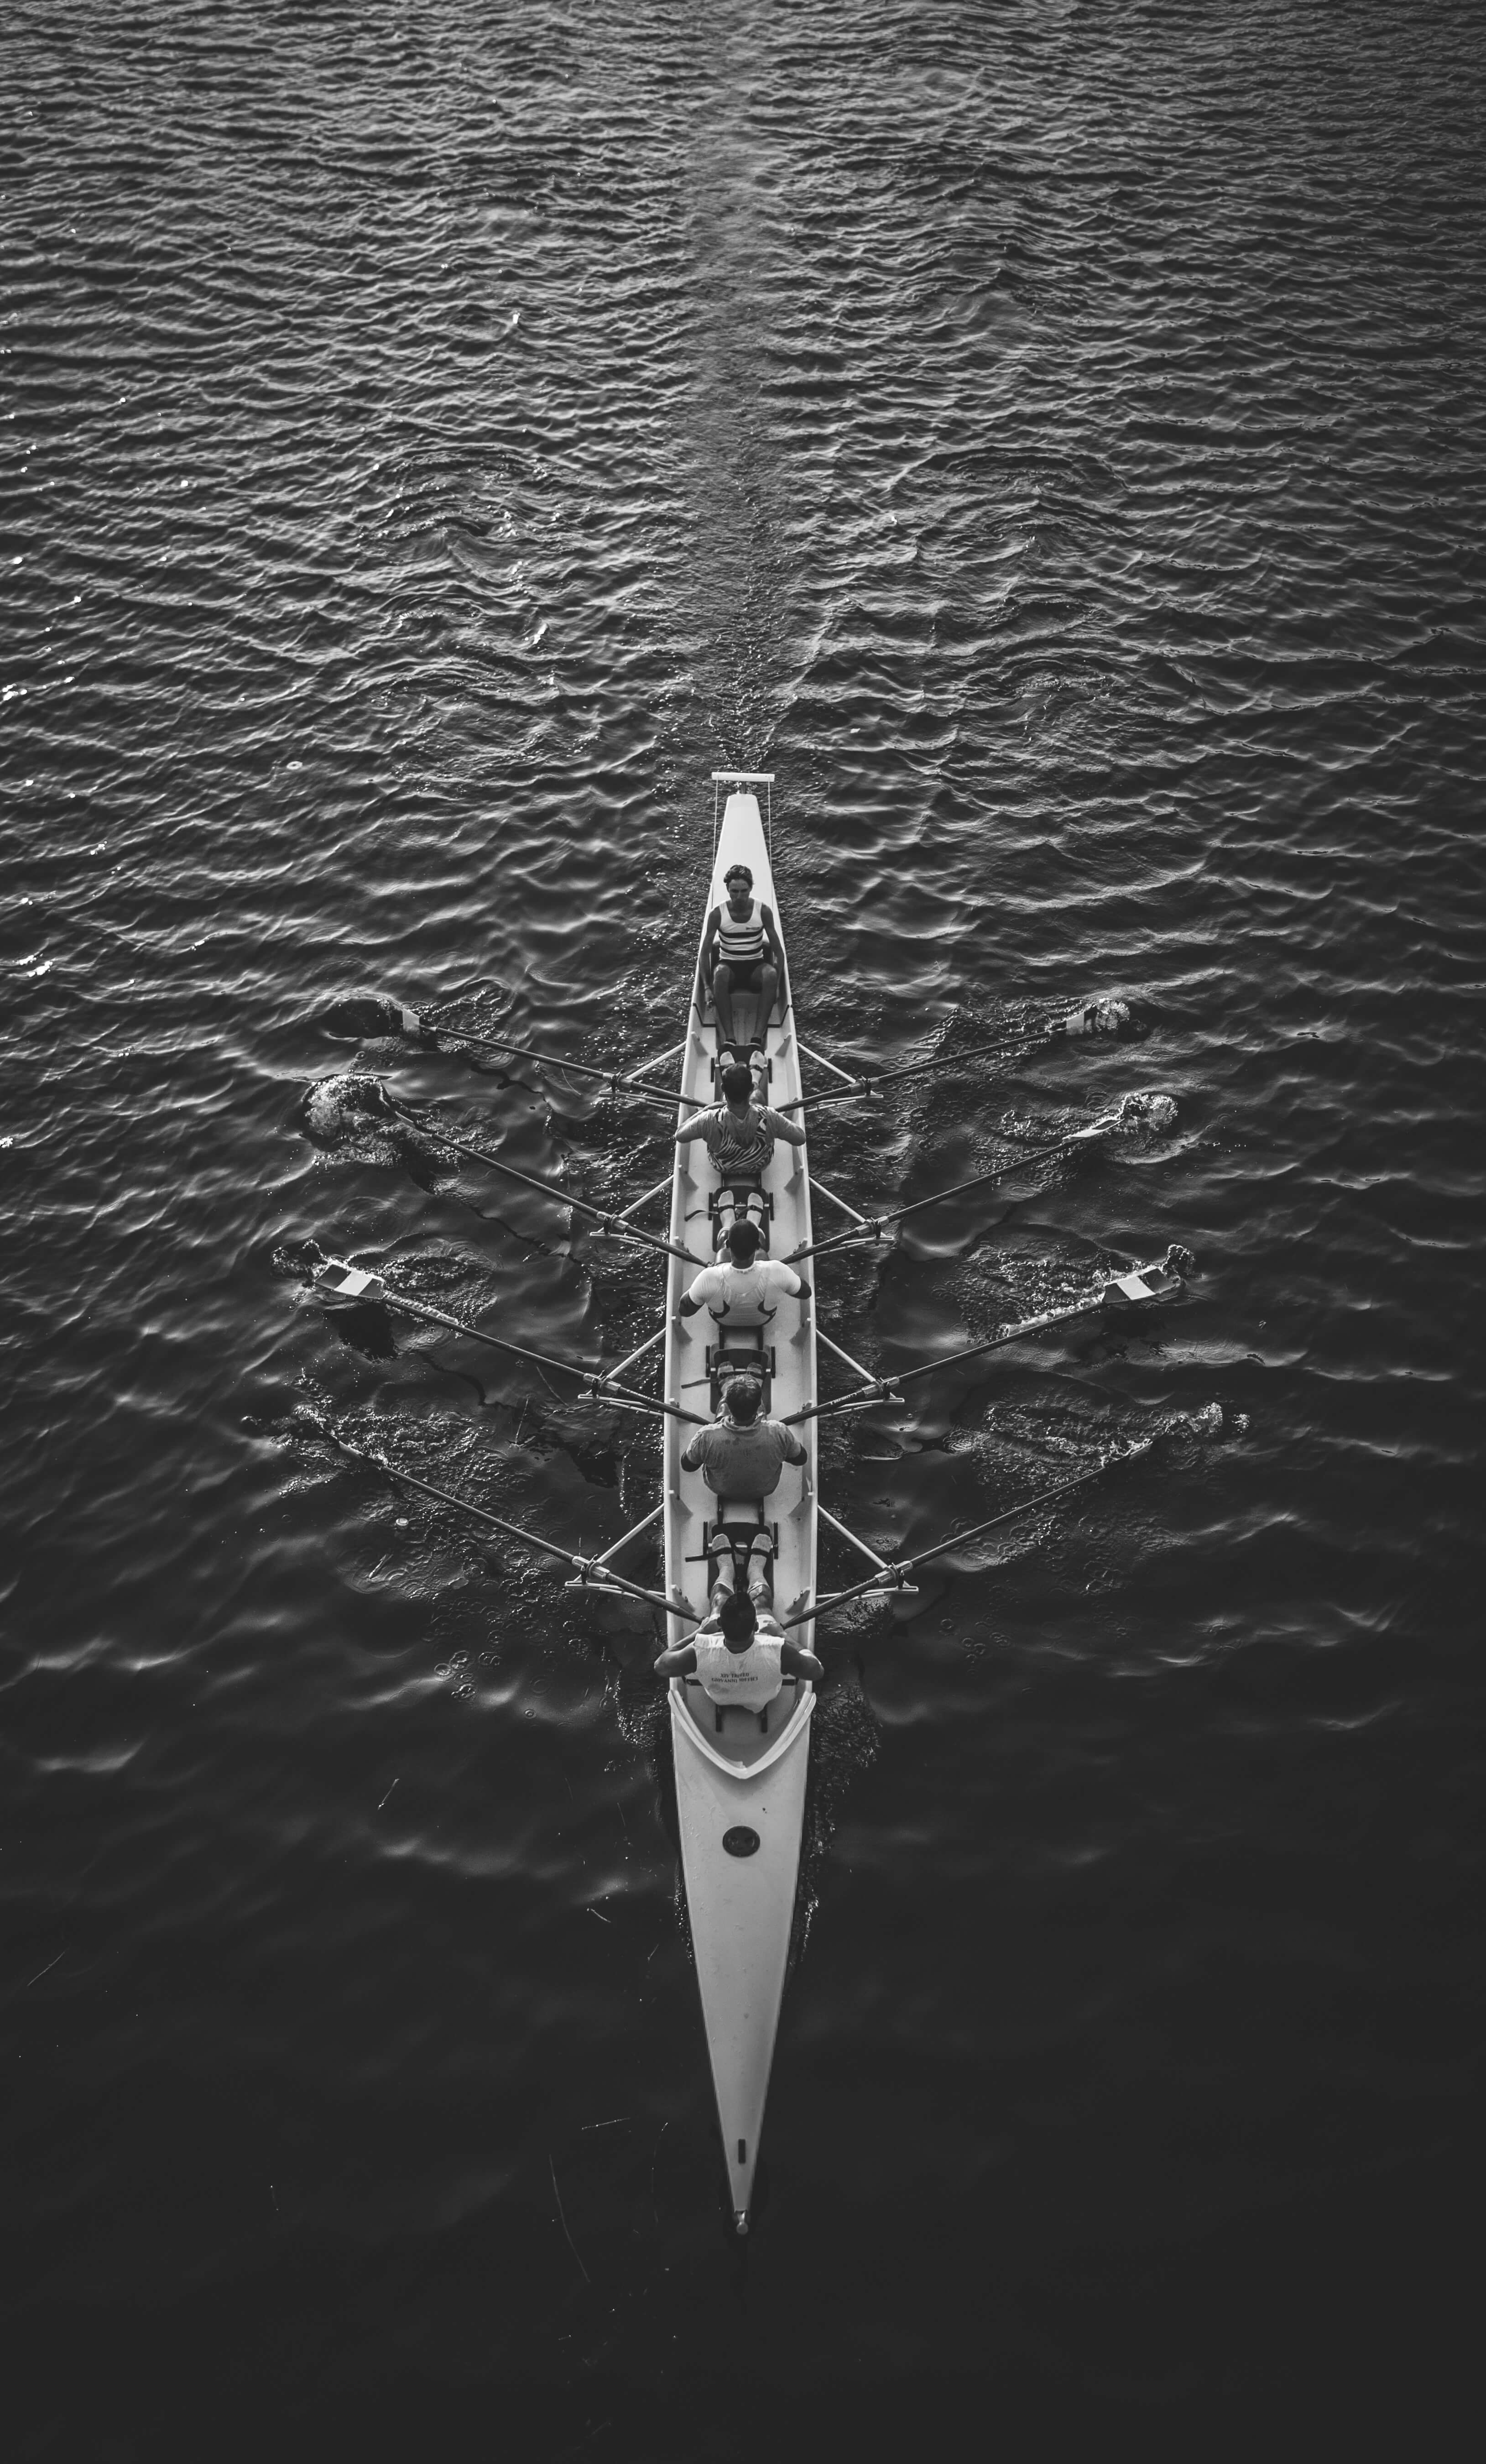 black and white birds eye view photo of people rowing